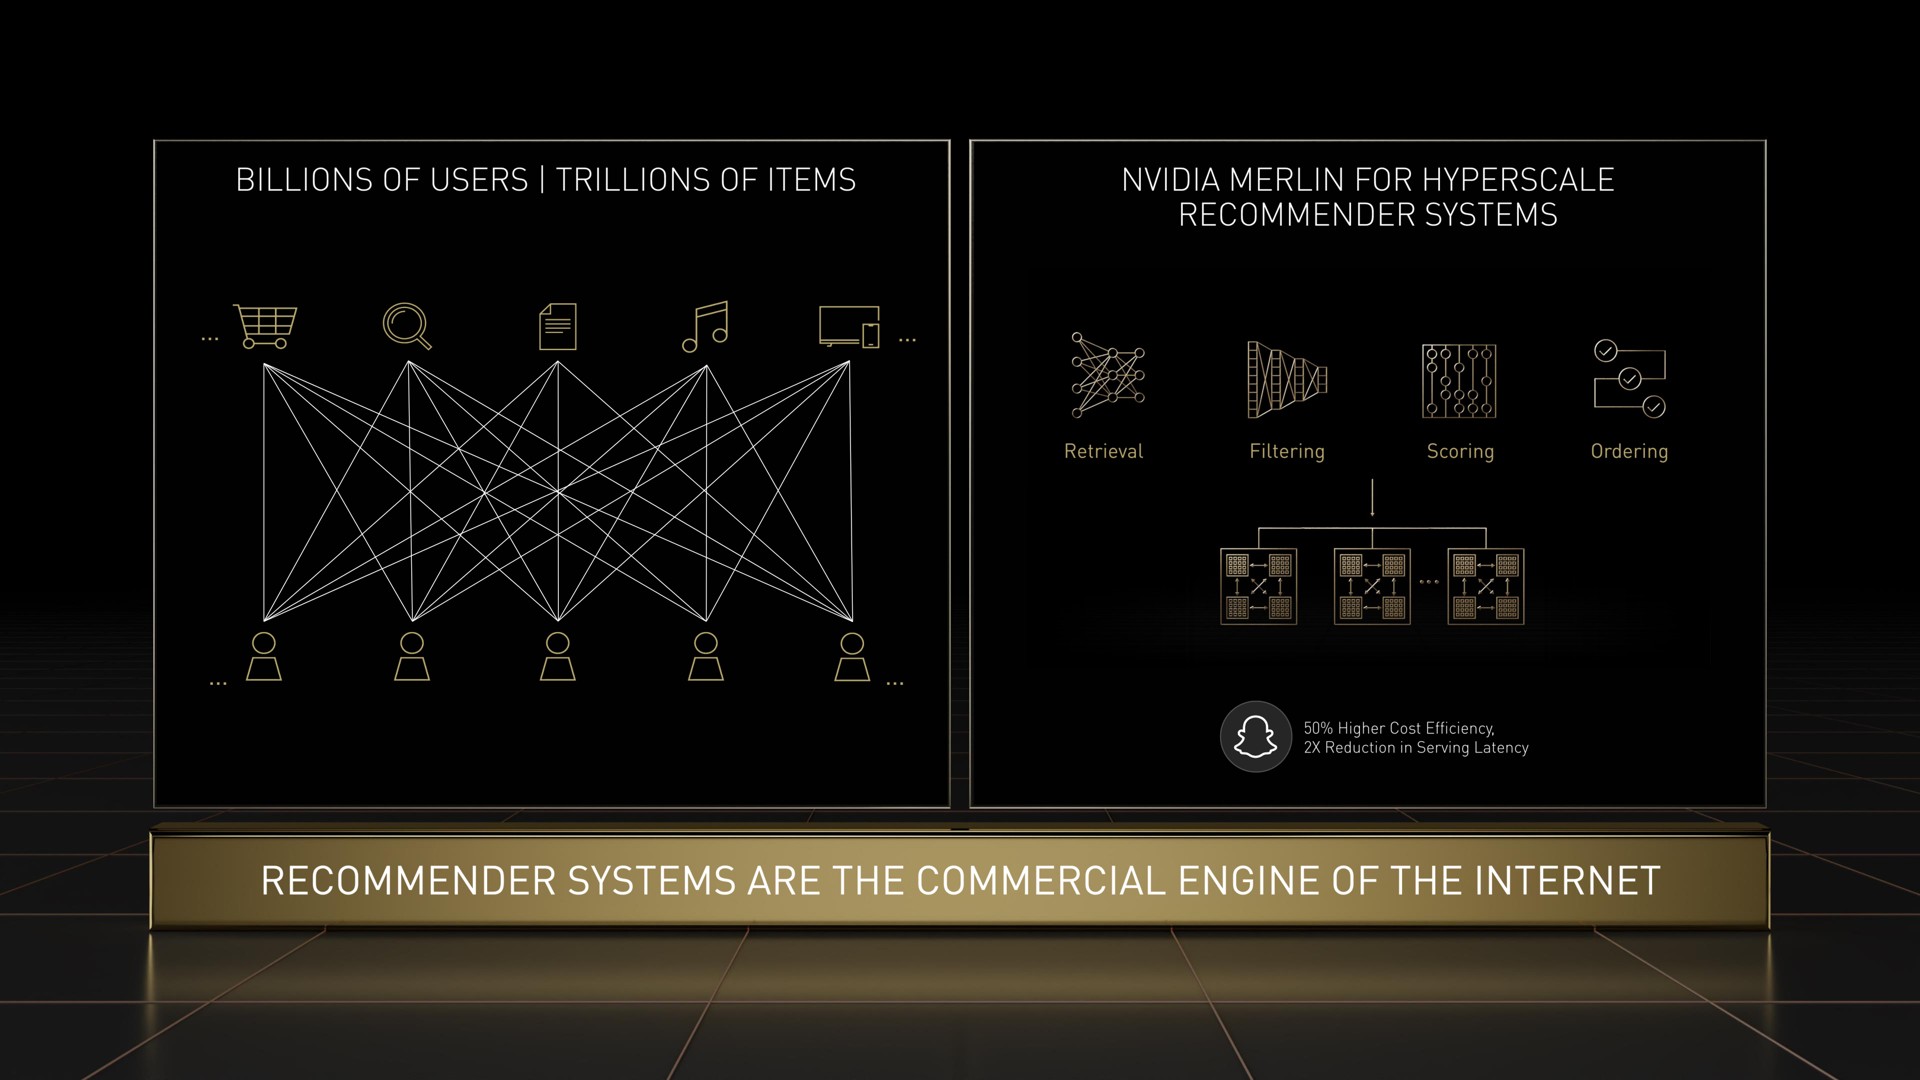 billions of users trillions of items merlin for recommender systems | NVIDIA